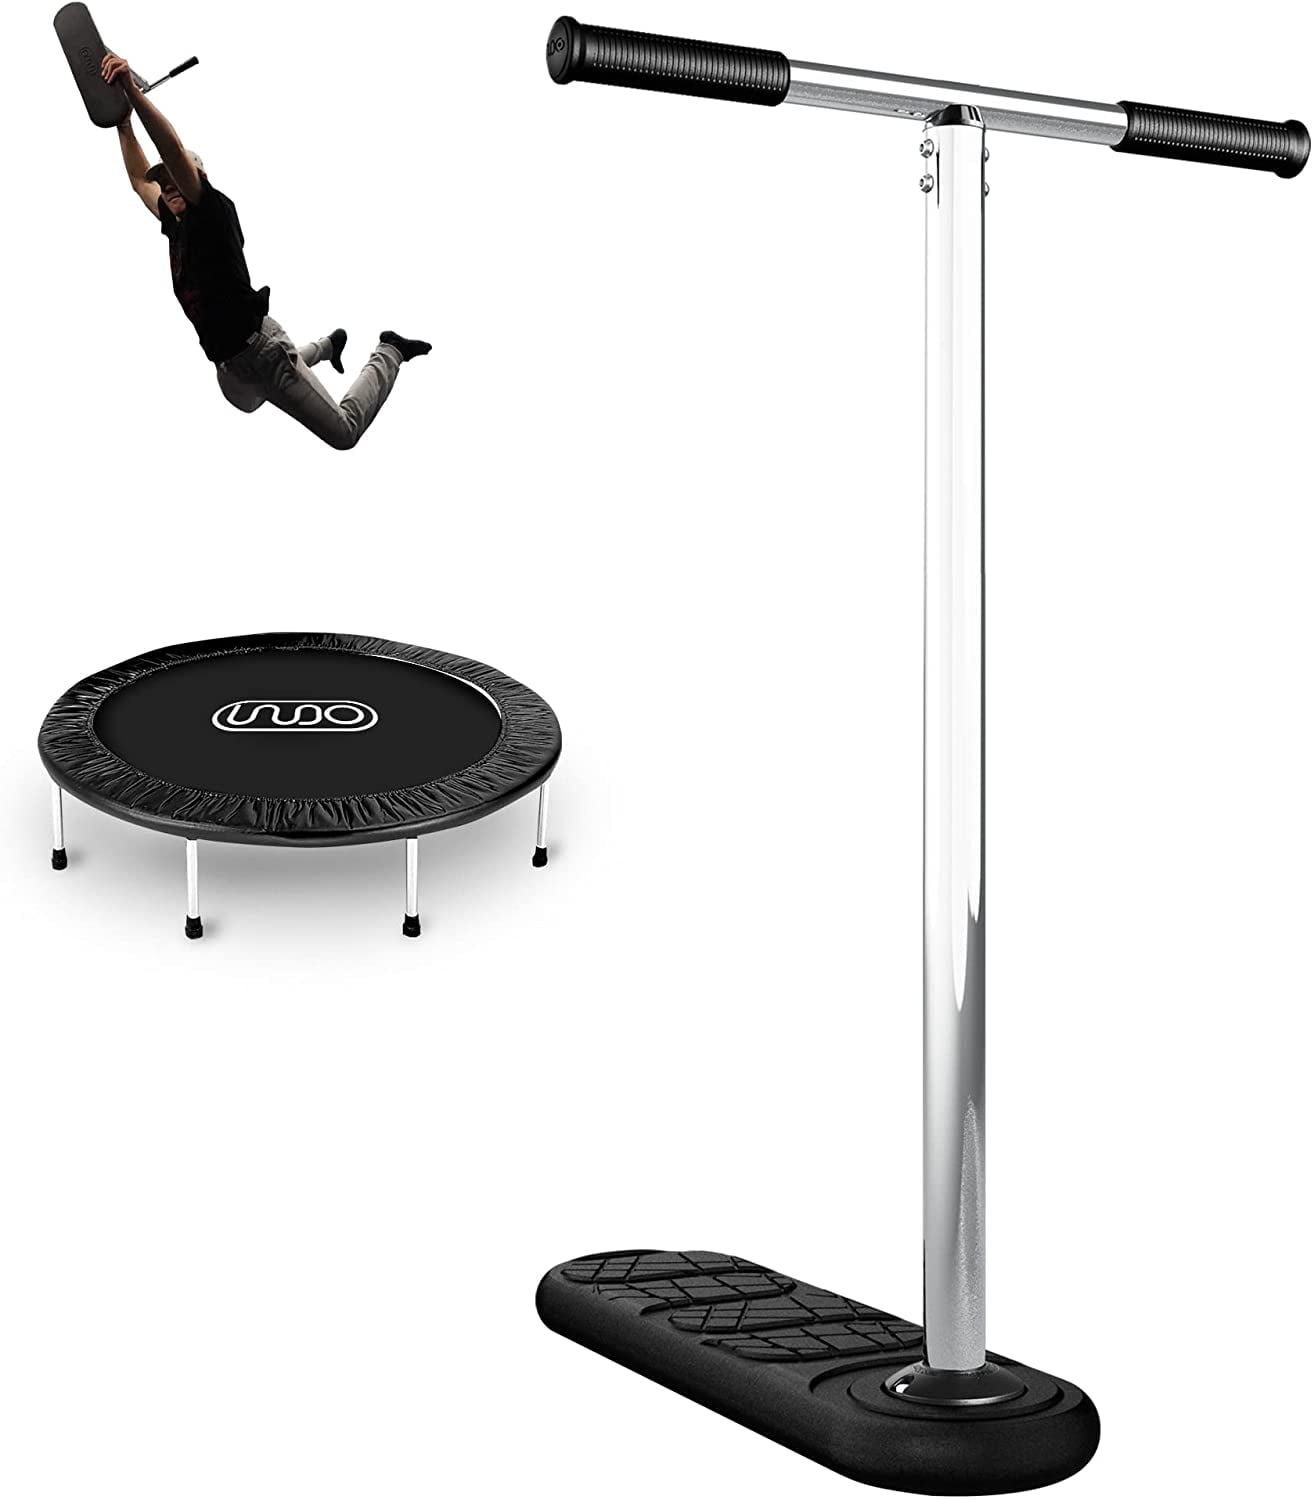 The Trick Scooter - Trampoline Stunt Scooter Teens Adults - Indoors & Use - Over 12 year - Walmart.com